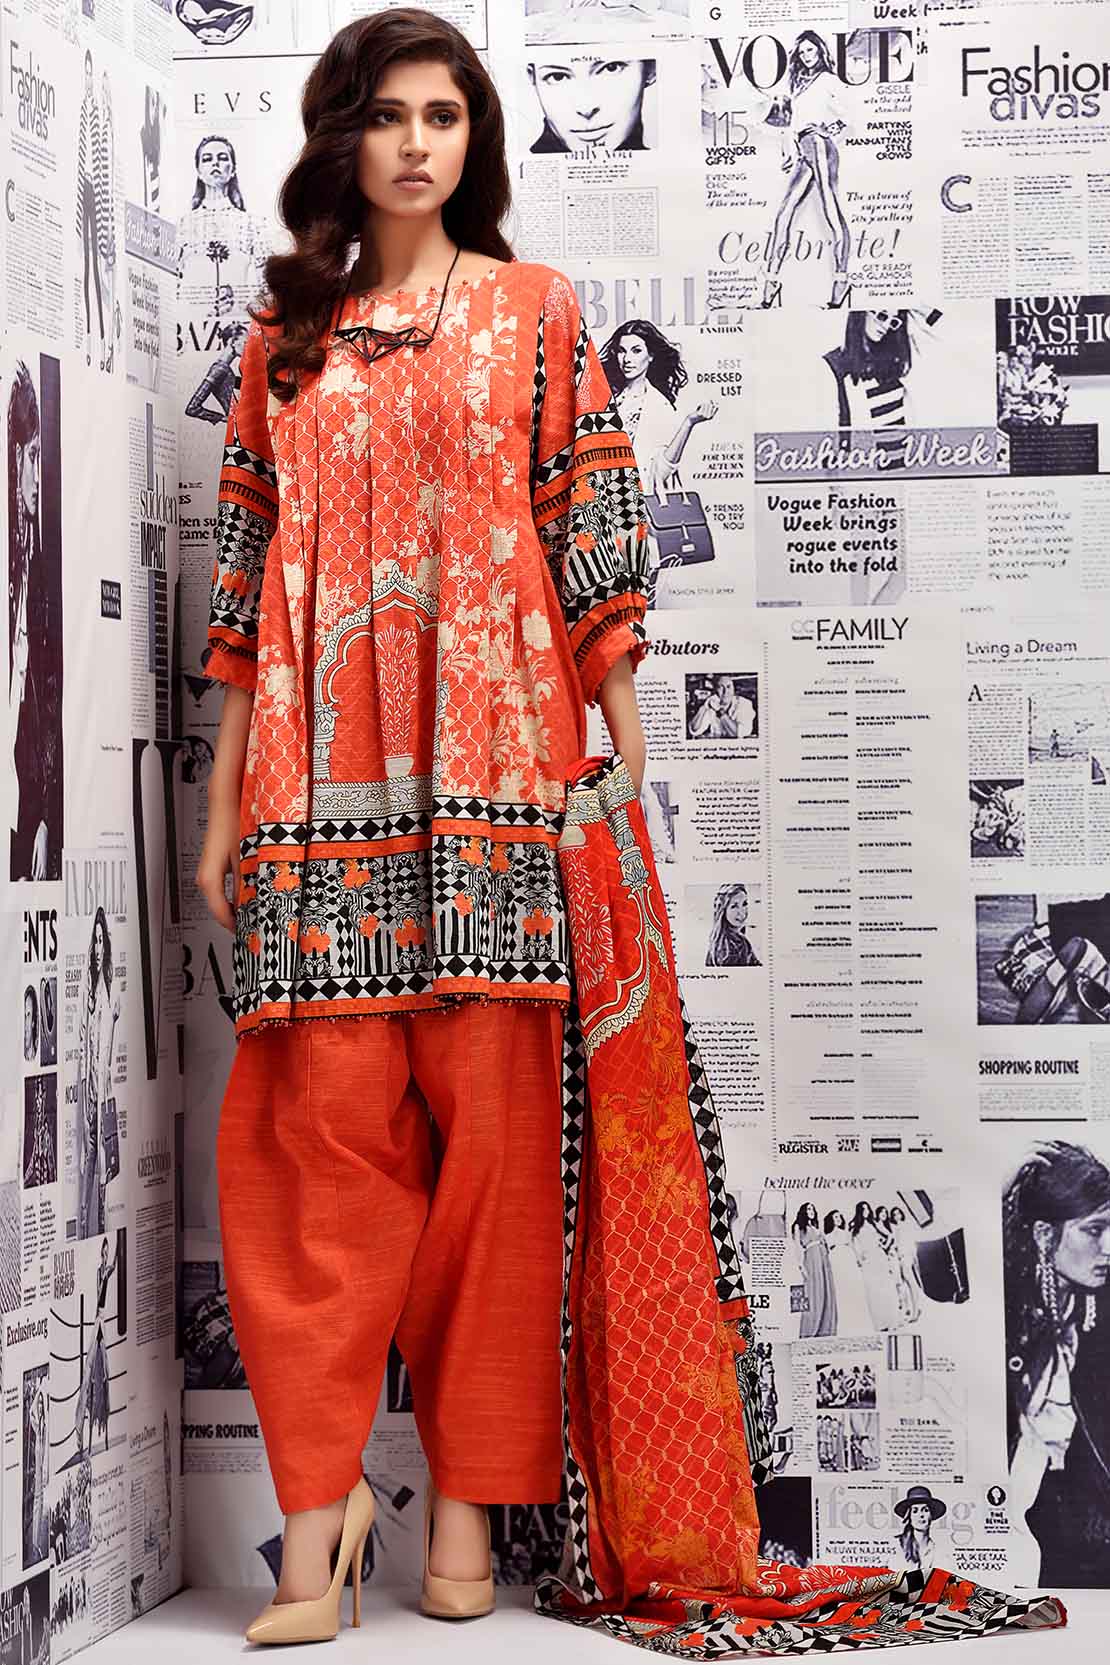 pakistani dresses 2019 lawn collection by warda